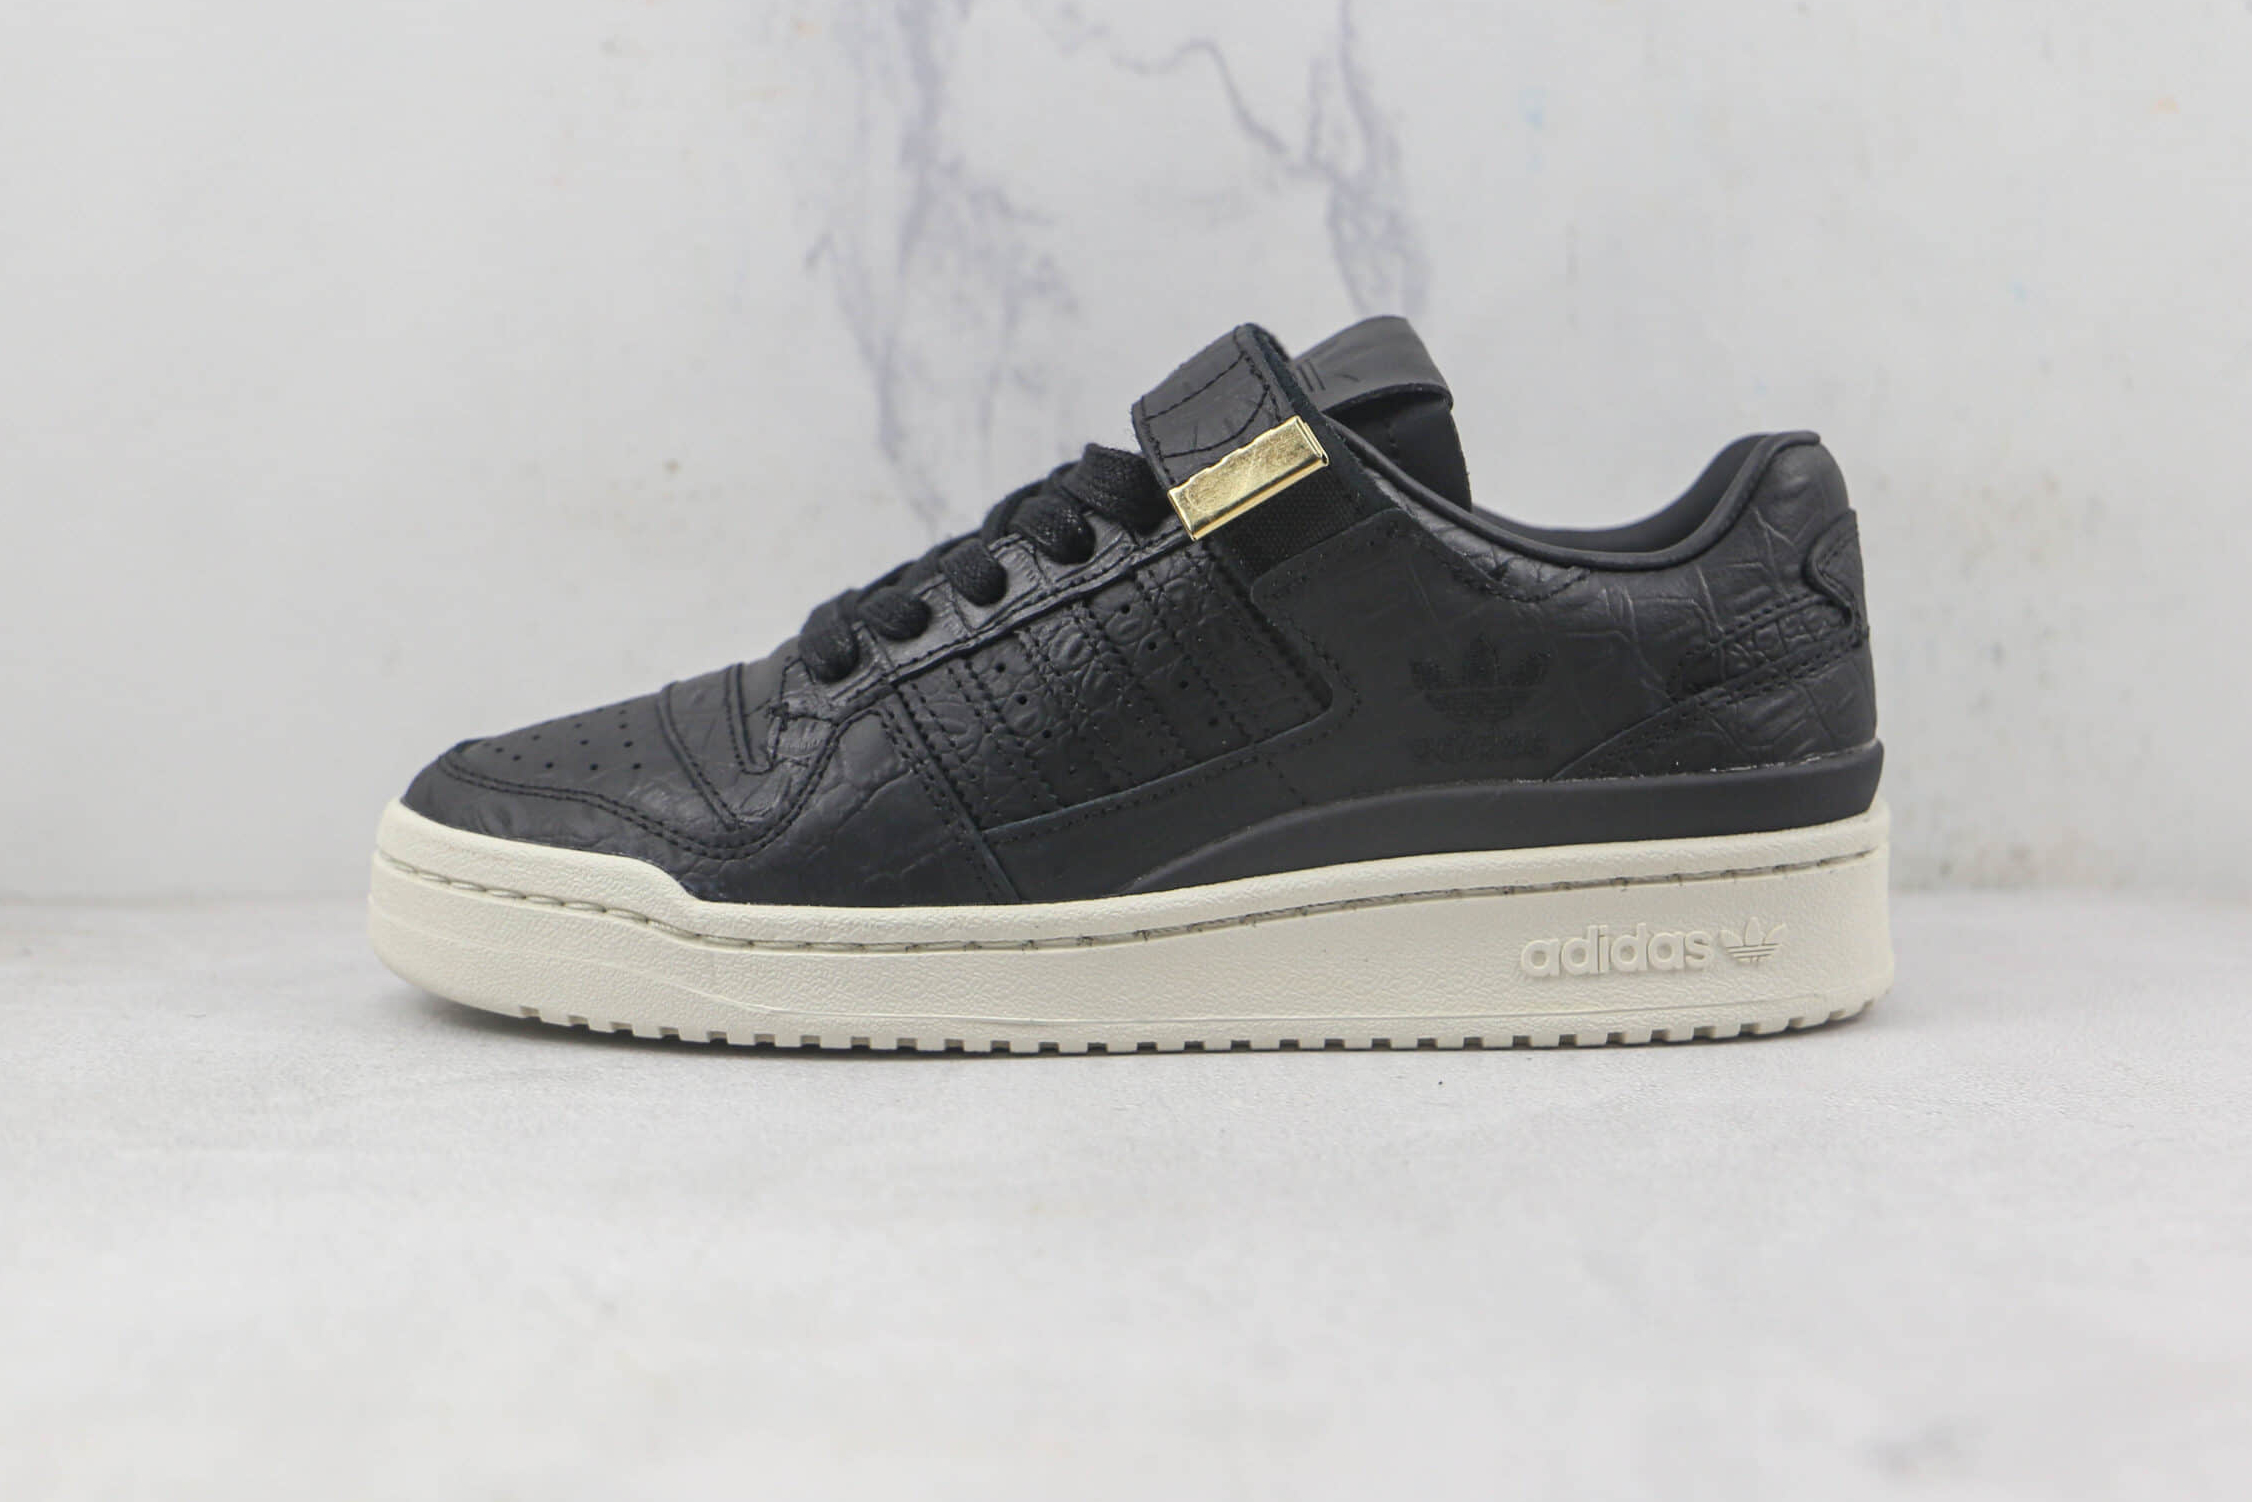 Adidas Forum 84 Low 'Croc Skin - Black' Sneakers - Limited Edition